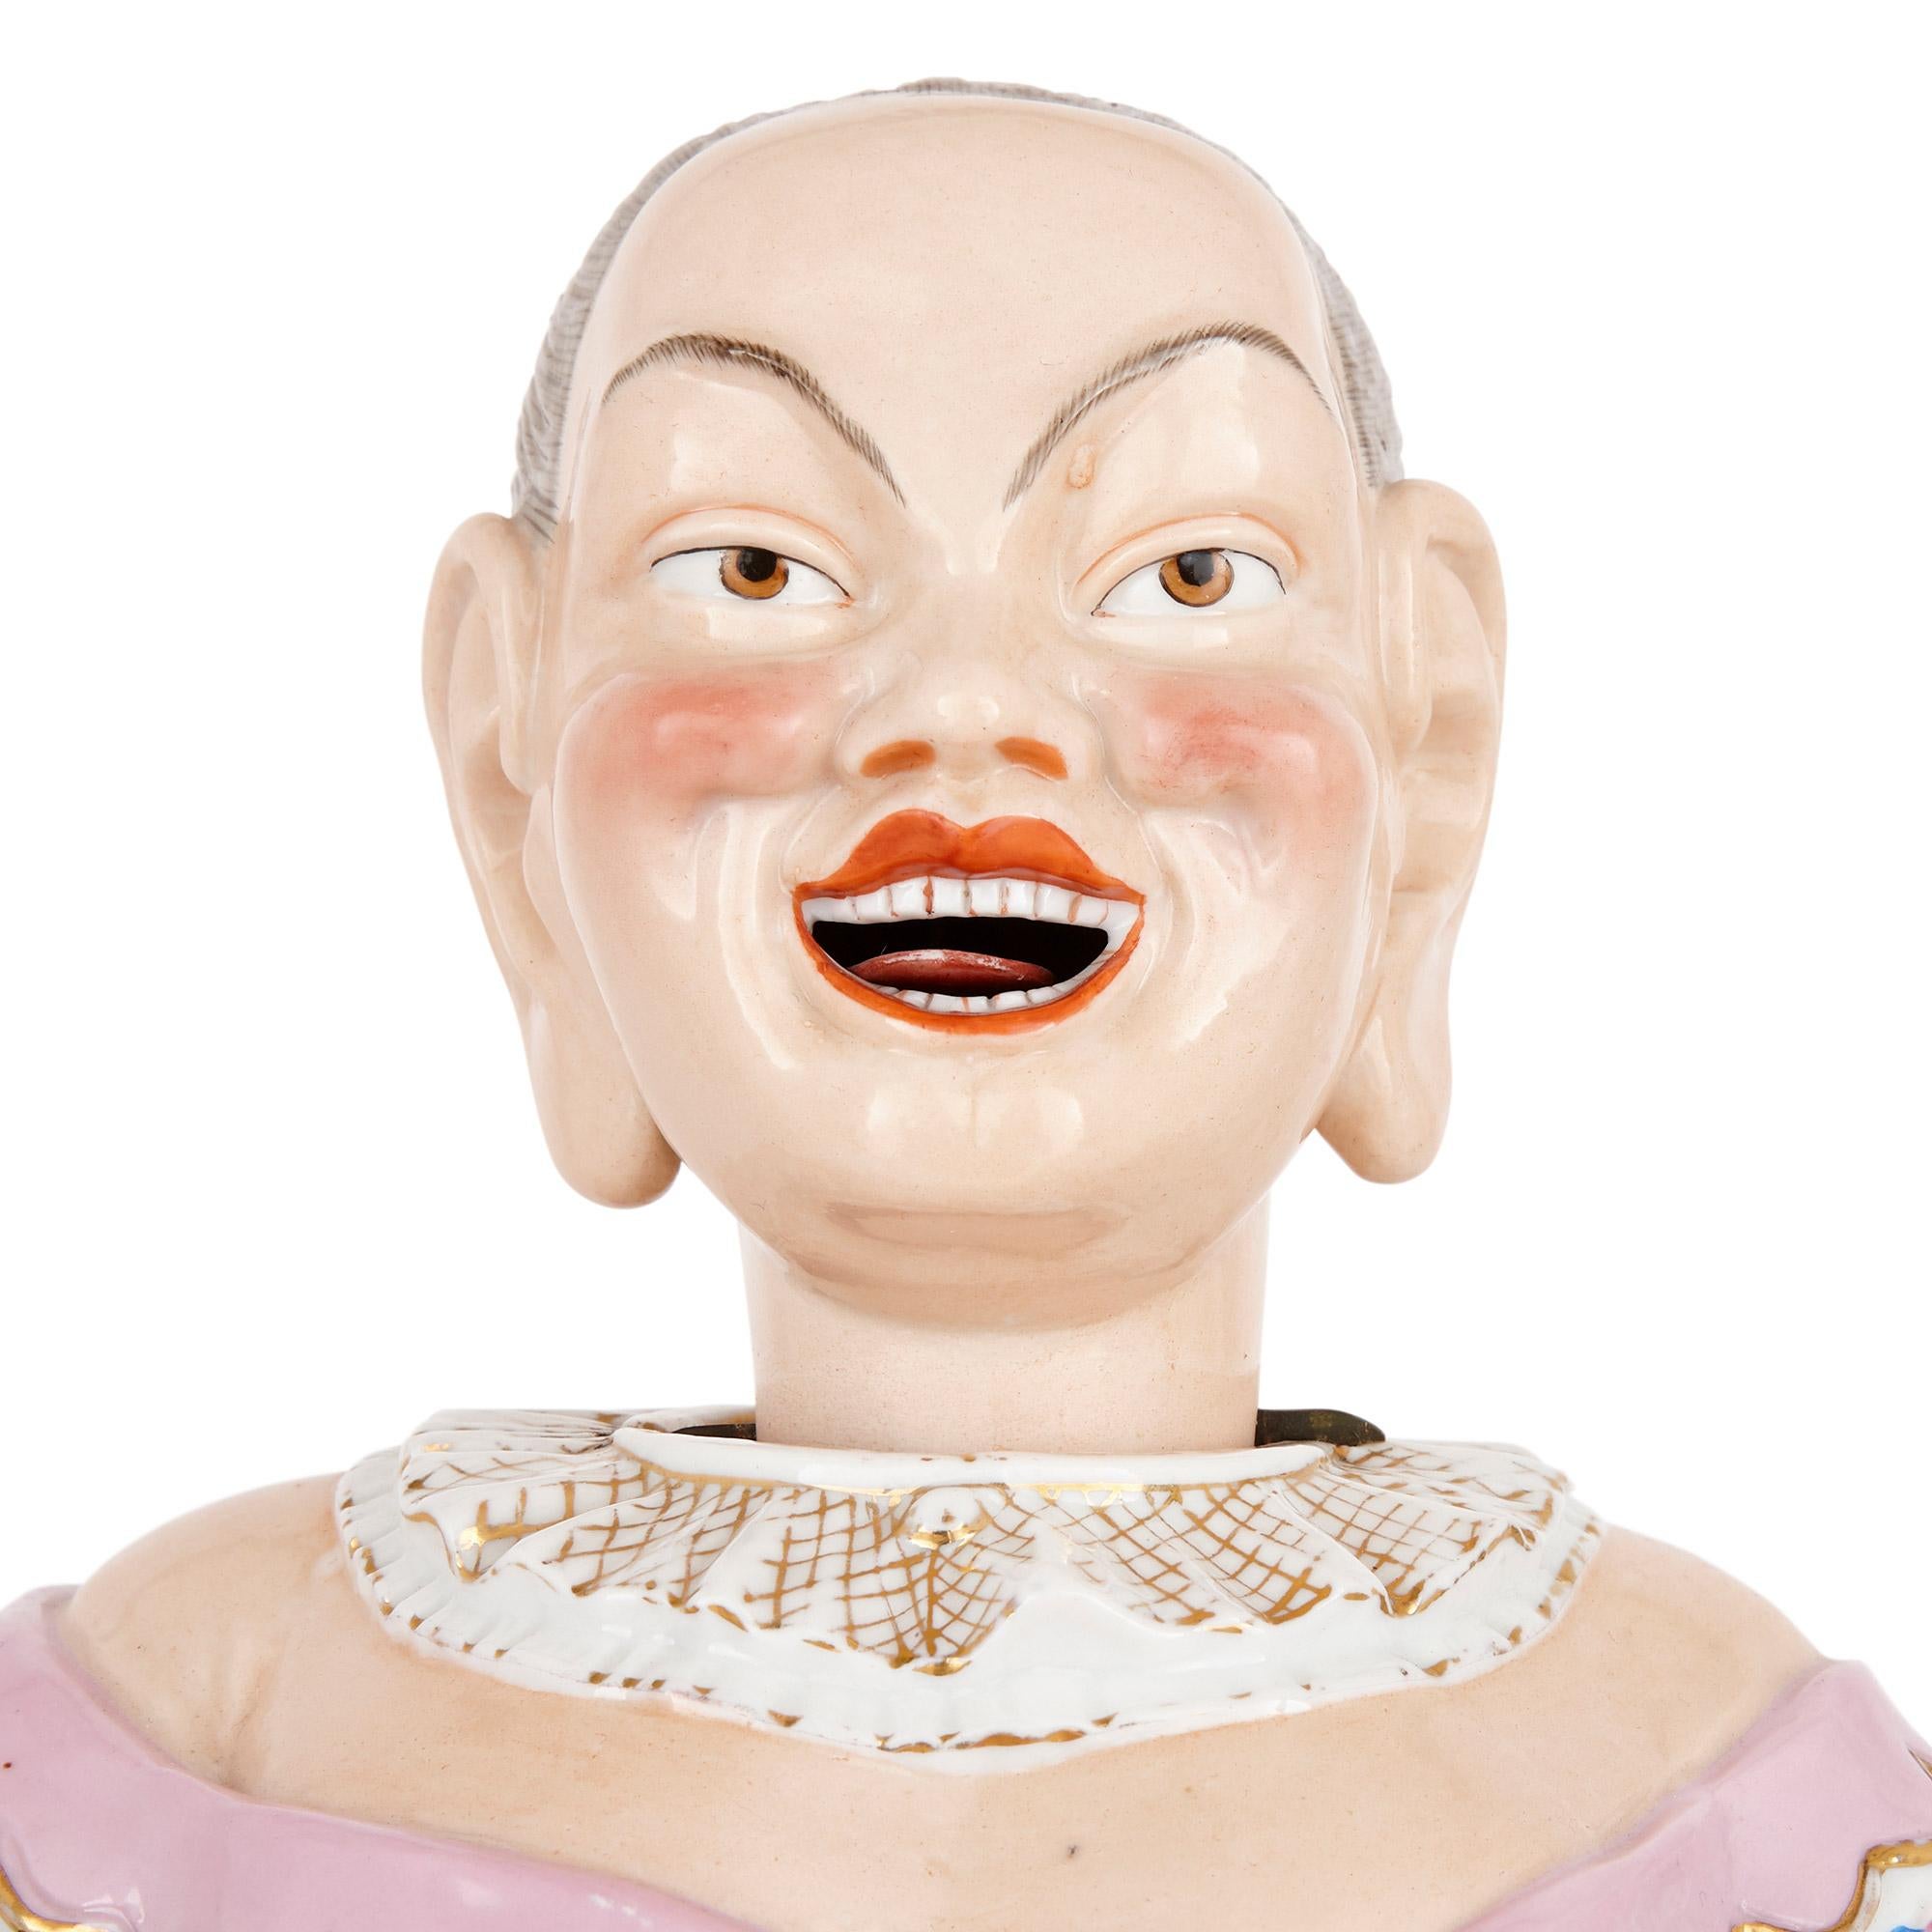 Chinoiserie Pair of Porcelain Nodding Head Figurines by Ernst Bohne Söhne